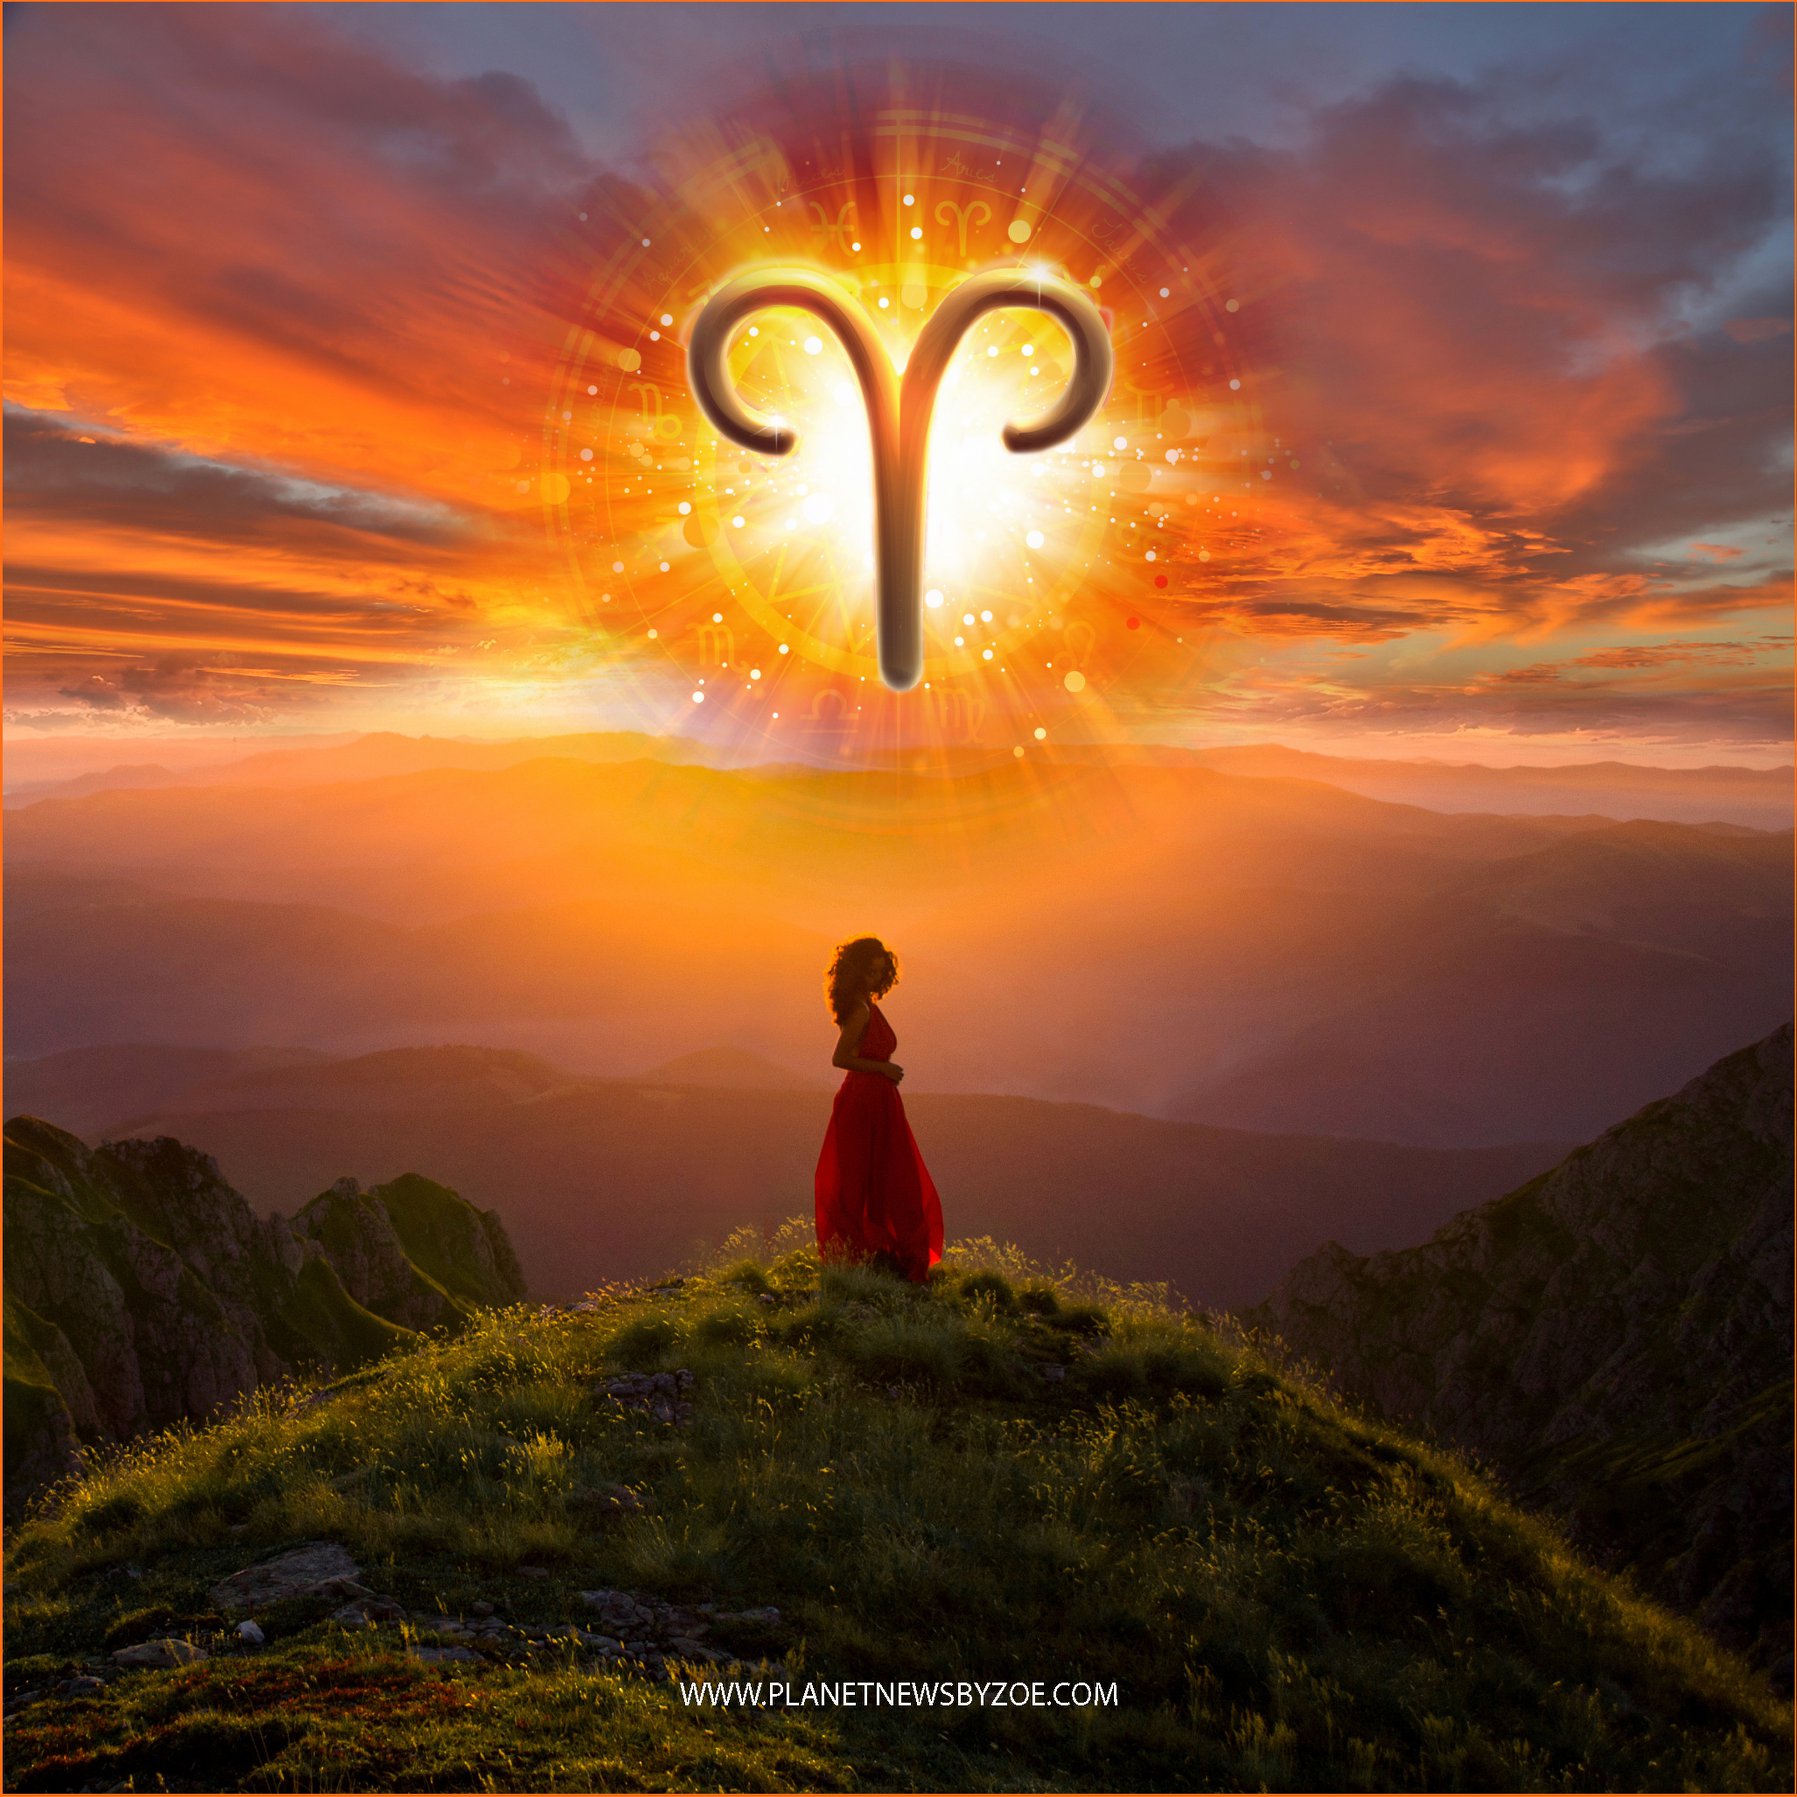 The New Moon In Aries Of April 12, 2021